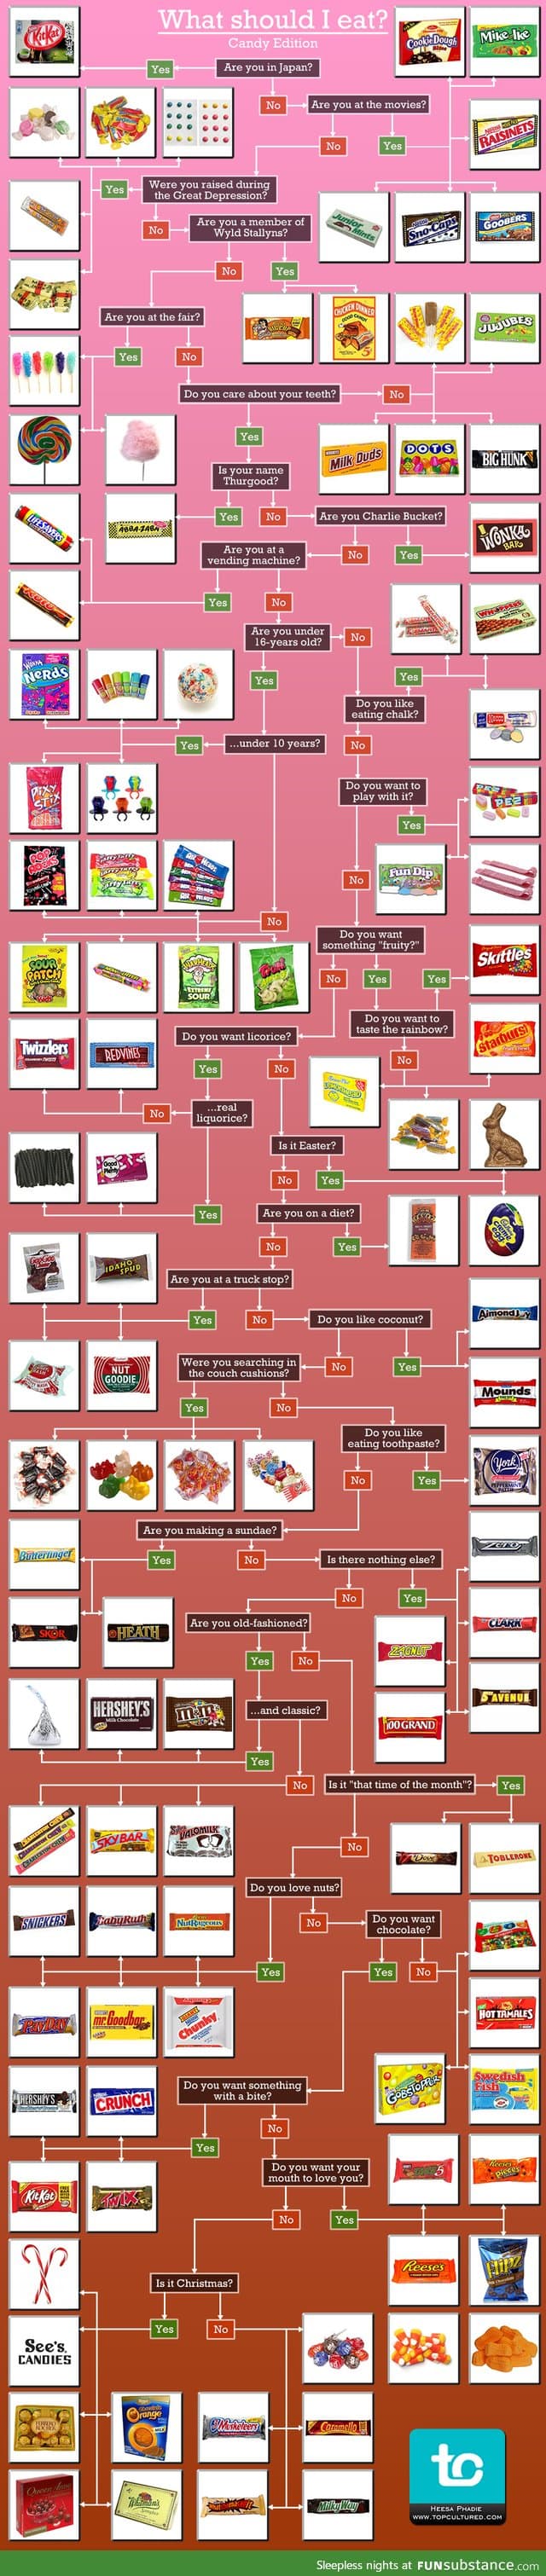 Which candy should you eat?